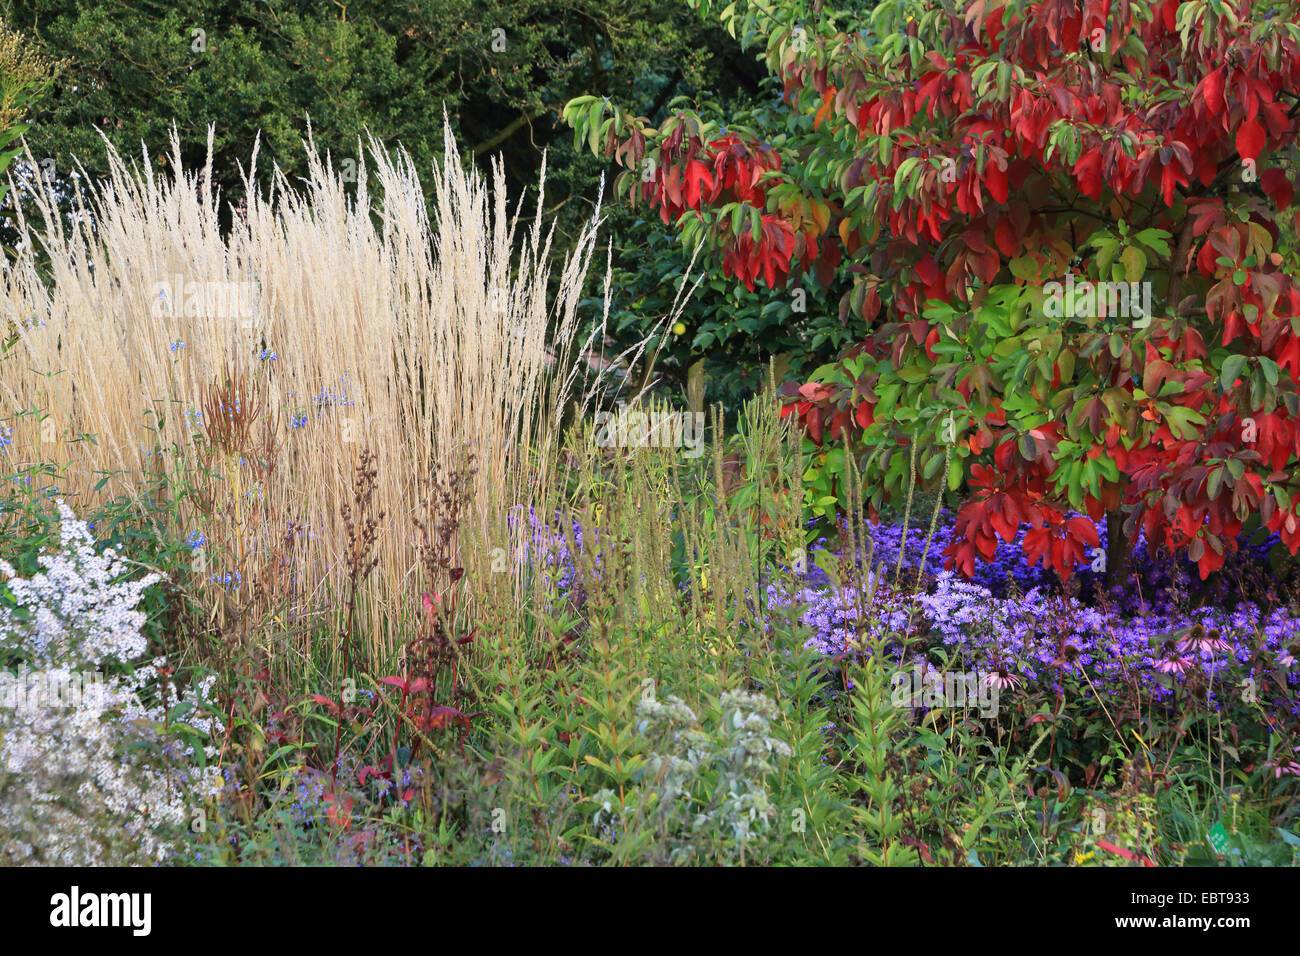 garden in autum with asters and grasses, Germany Stock Photo